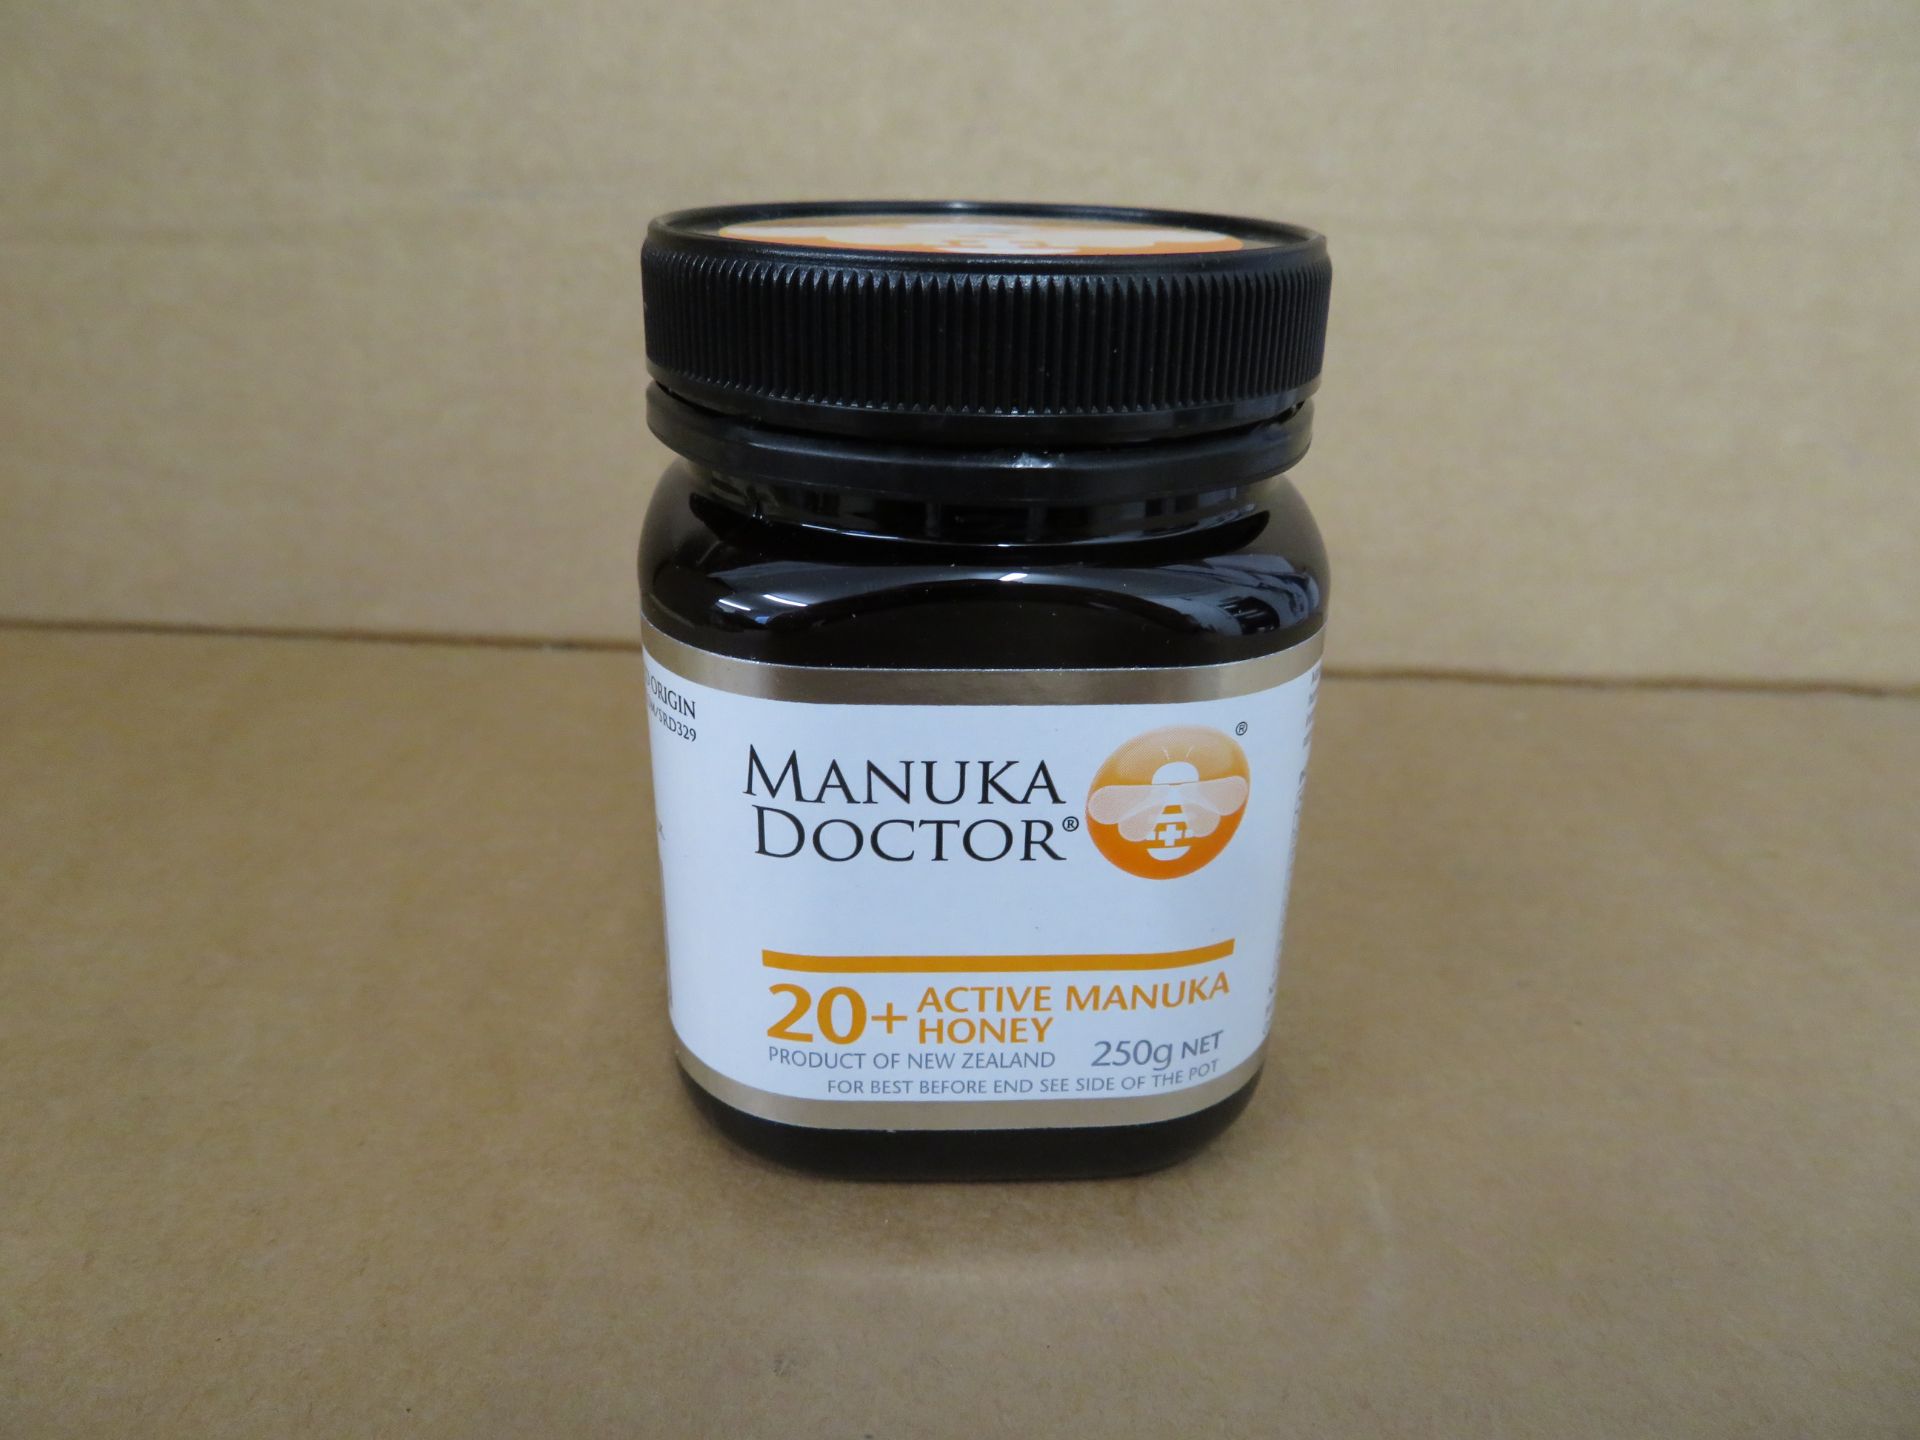 12 x 250G Manuka Doctor 20+ Active Manuka Honey. Product of New Zealand. RRP £30 each, giving this